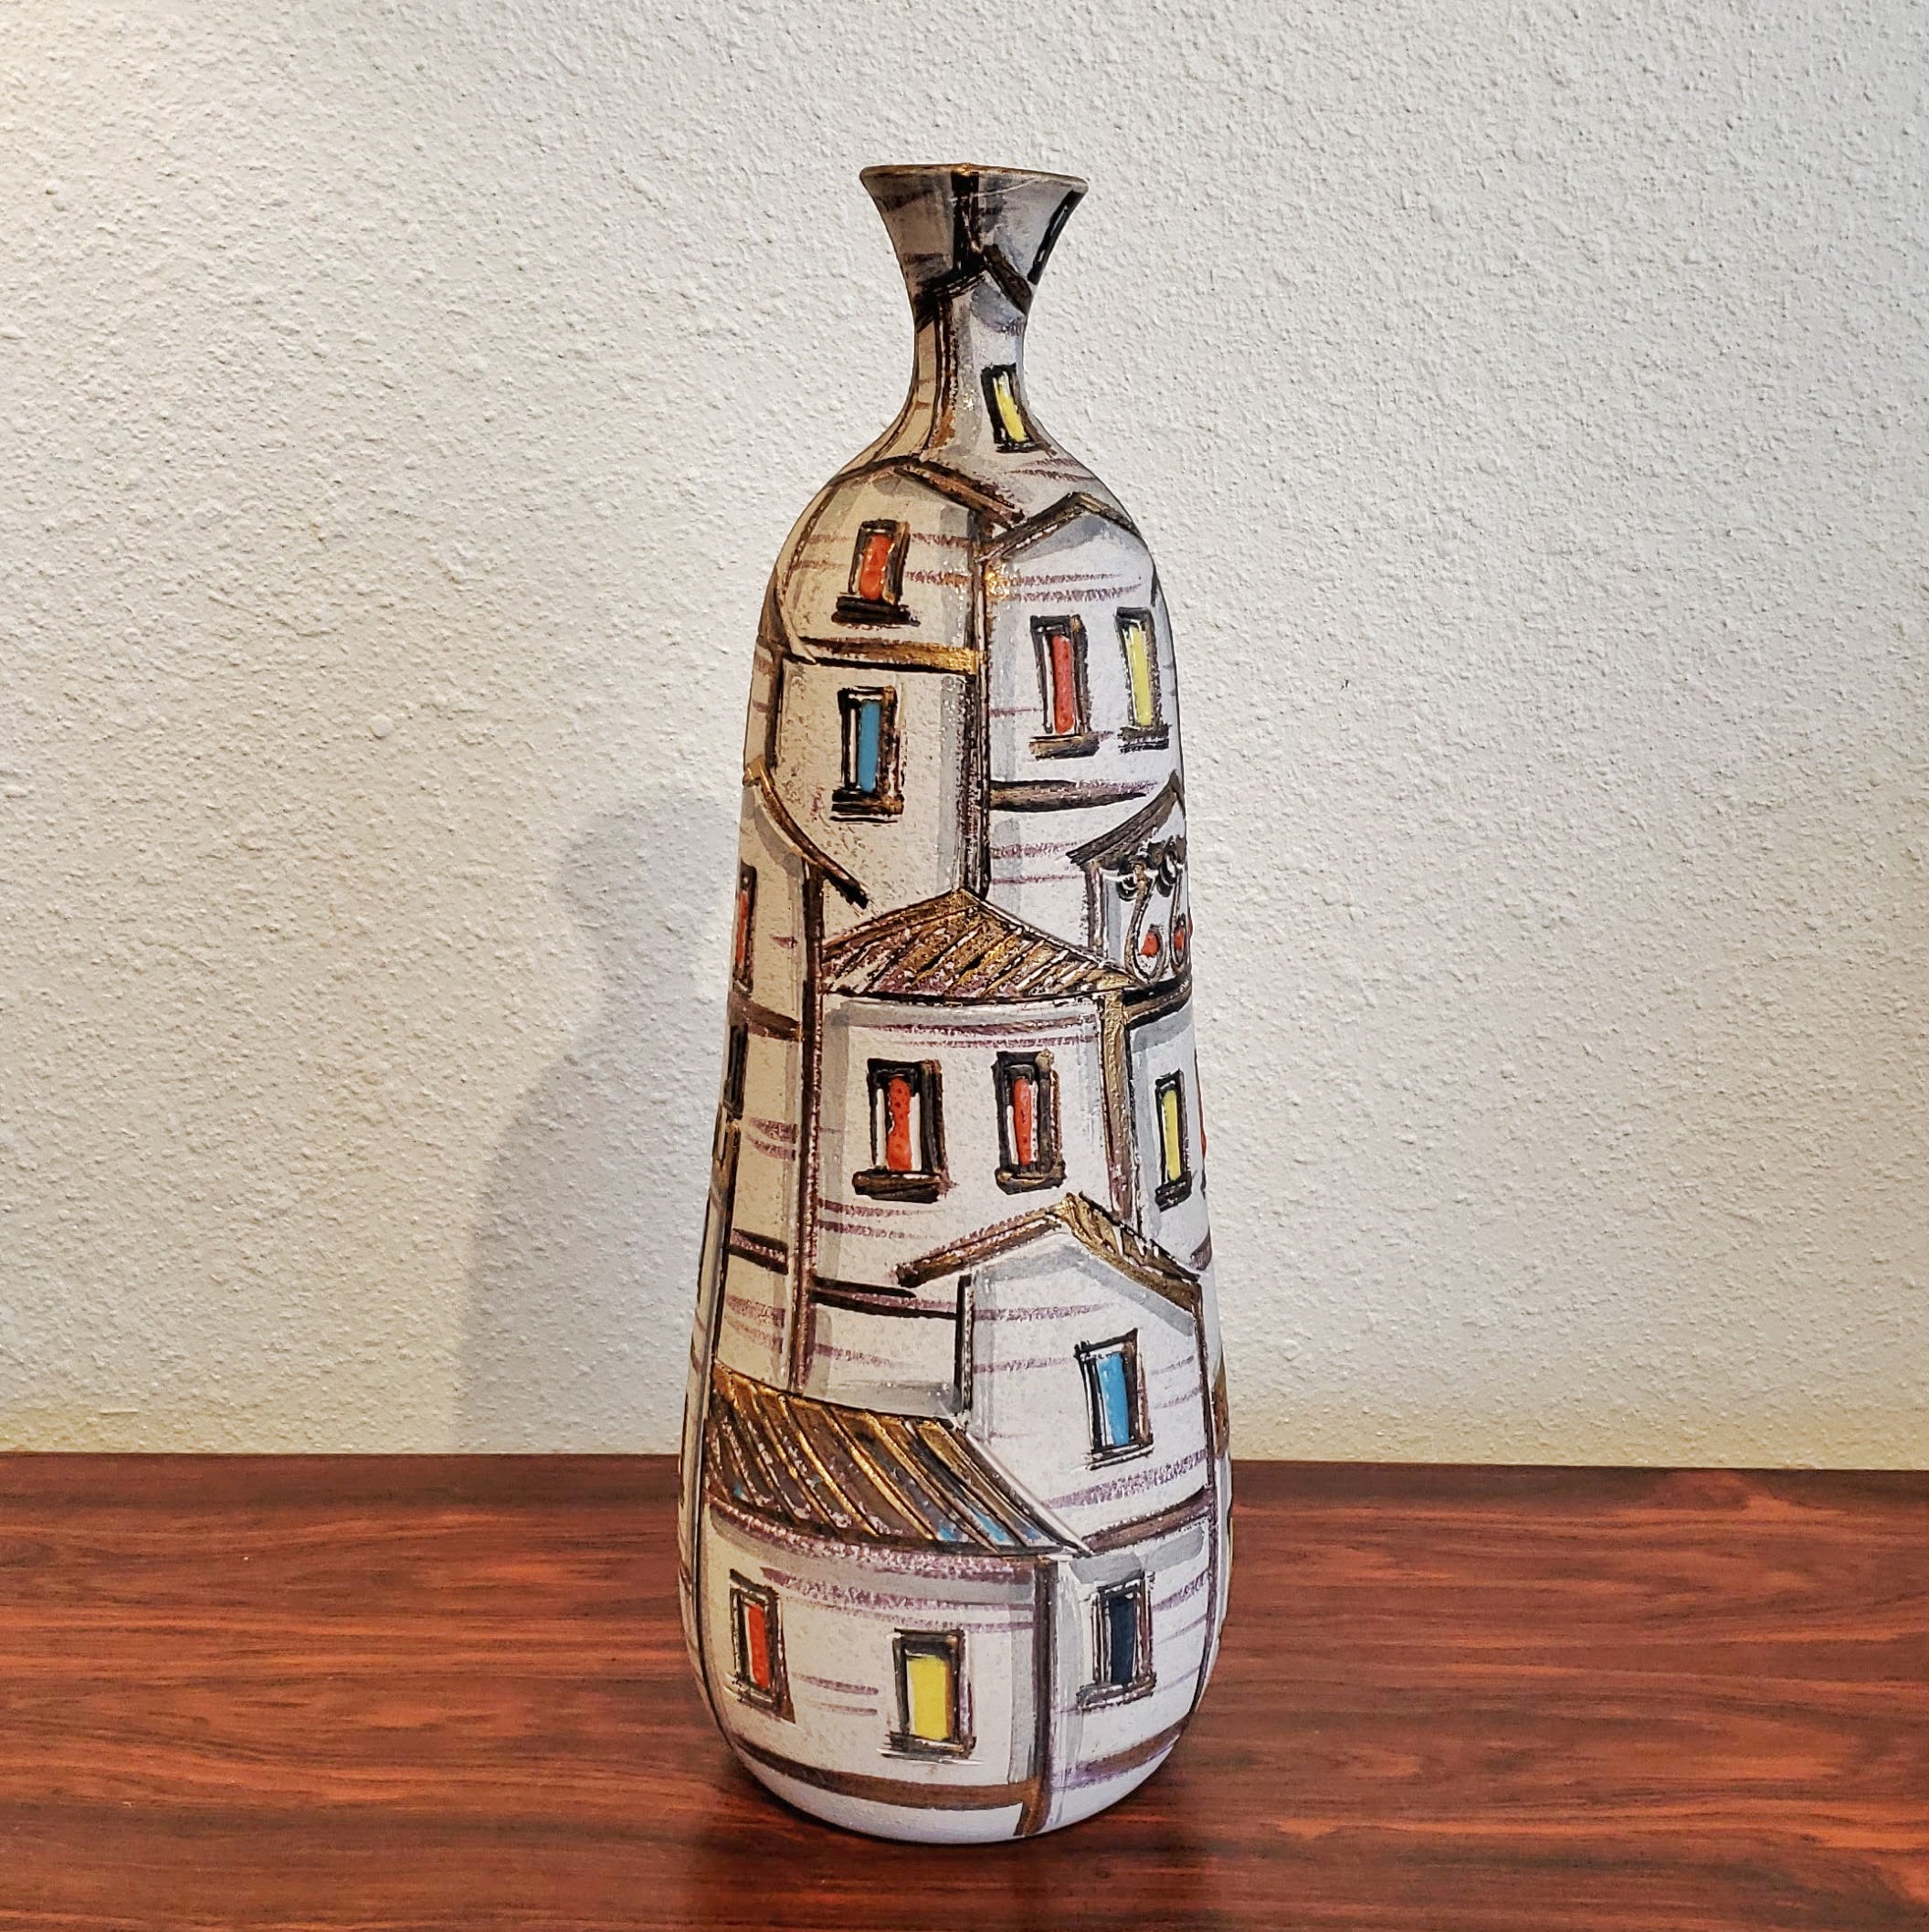 FRATELLI FANCIULLACCI 'ROOF TOPS' DECOR BOTTLE VASE (ITALY) (A)